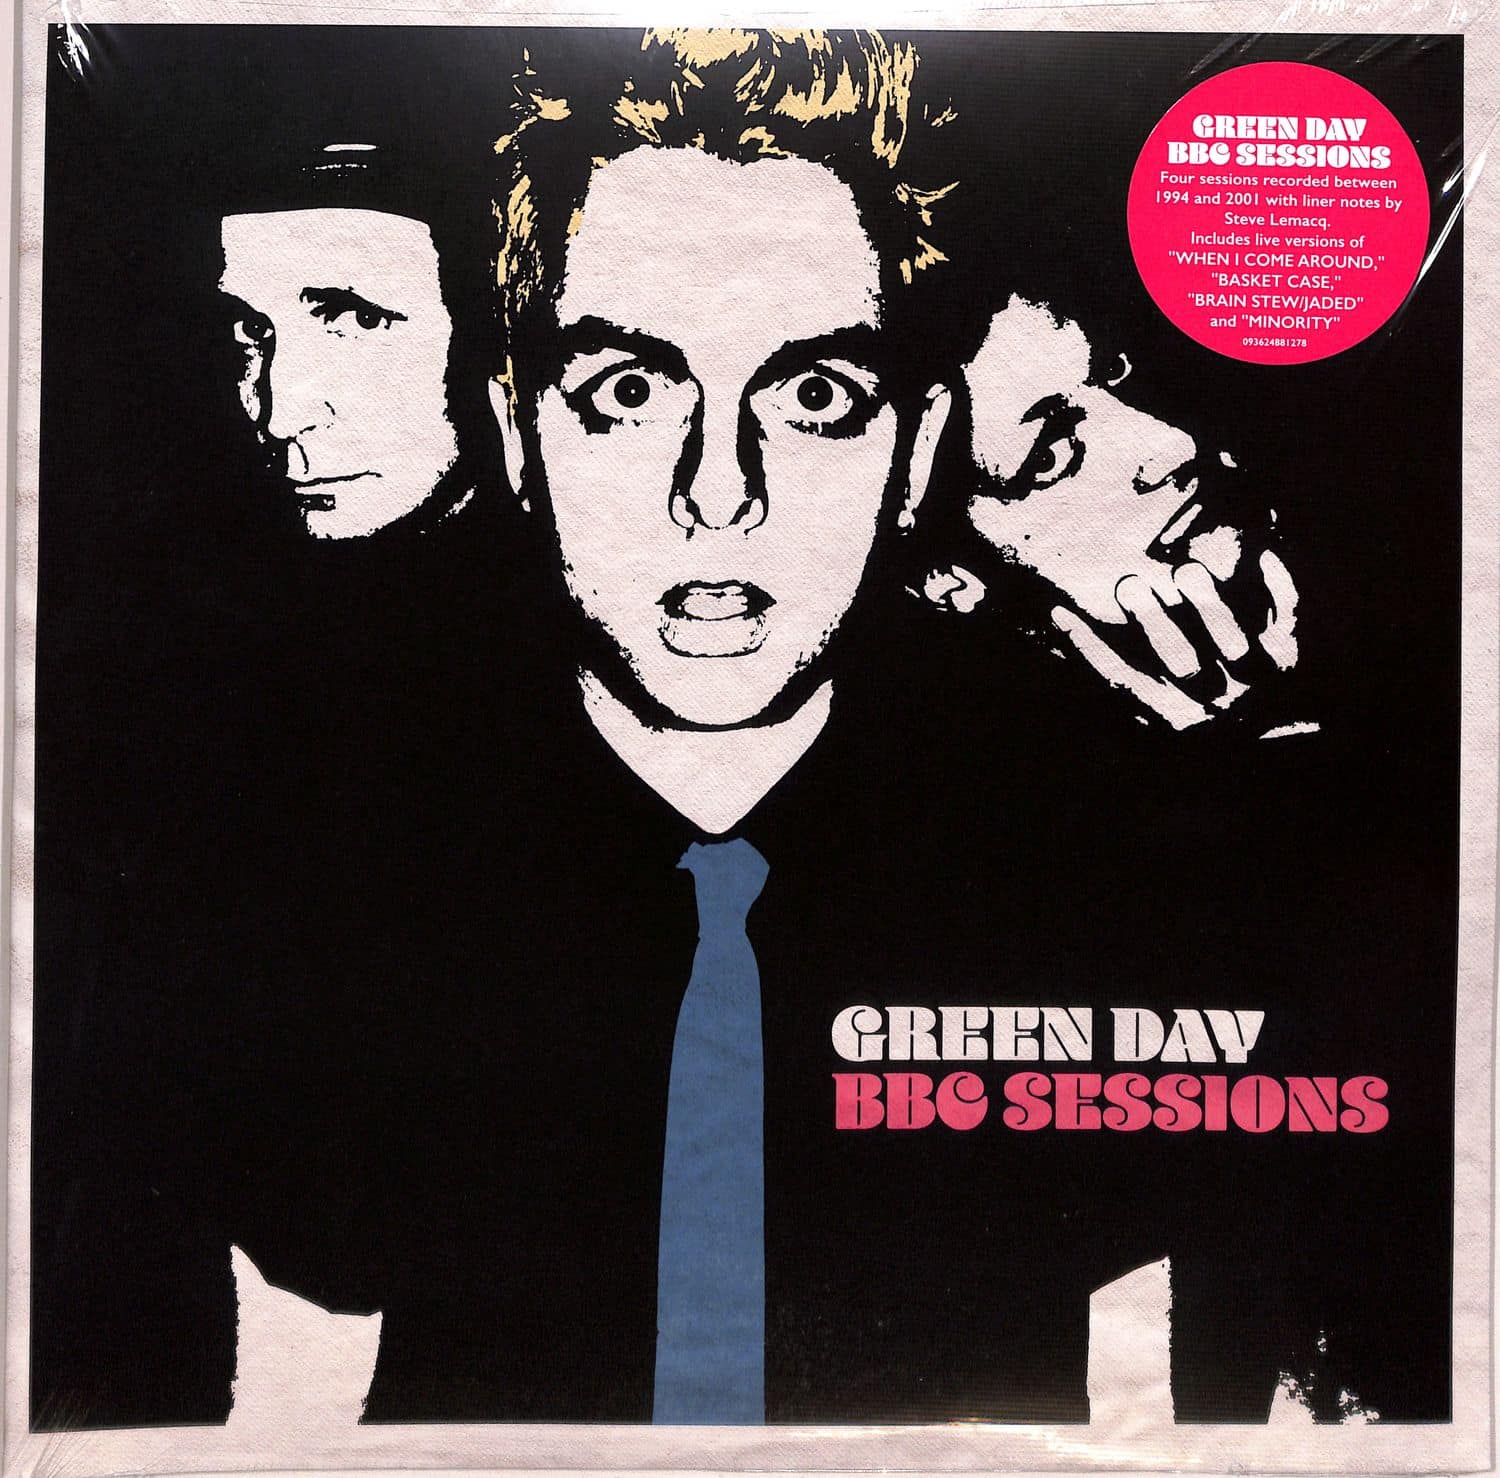 Green Day - BBC SESSIONS 